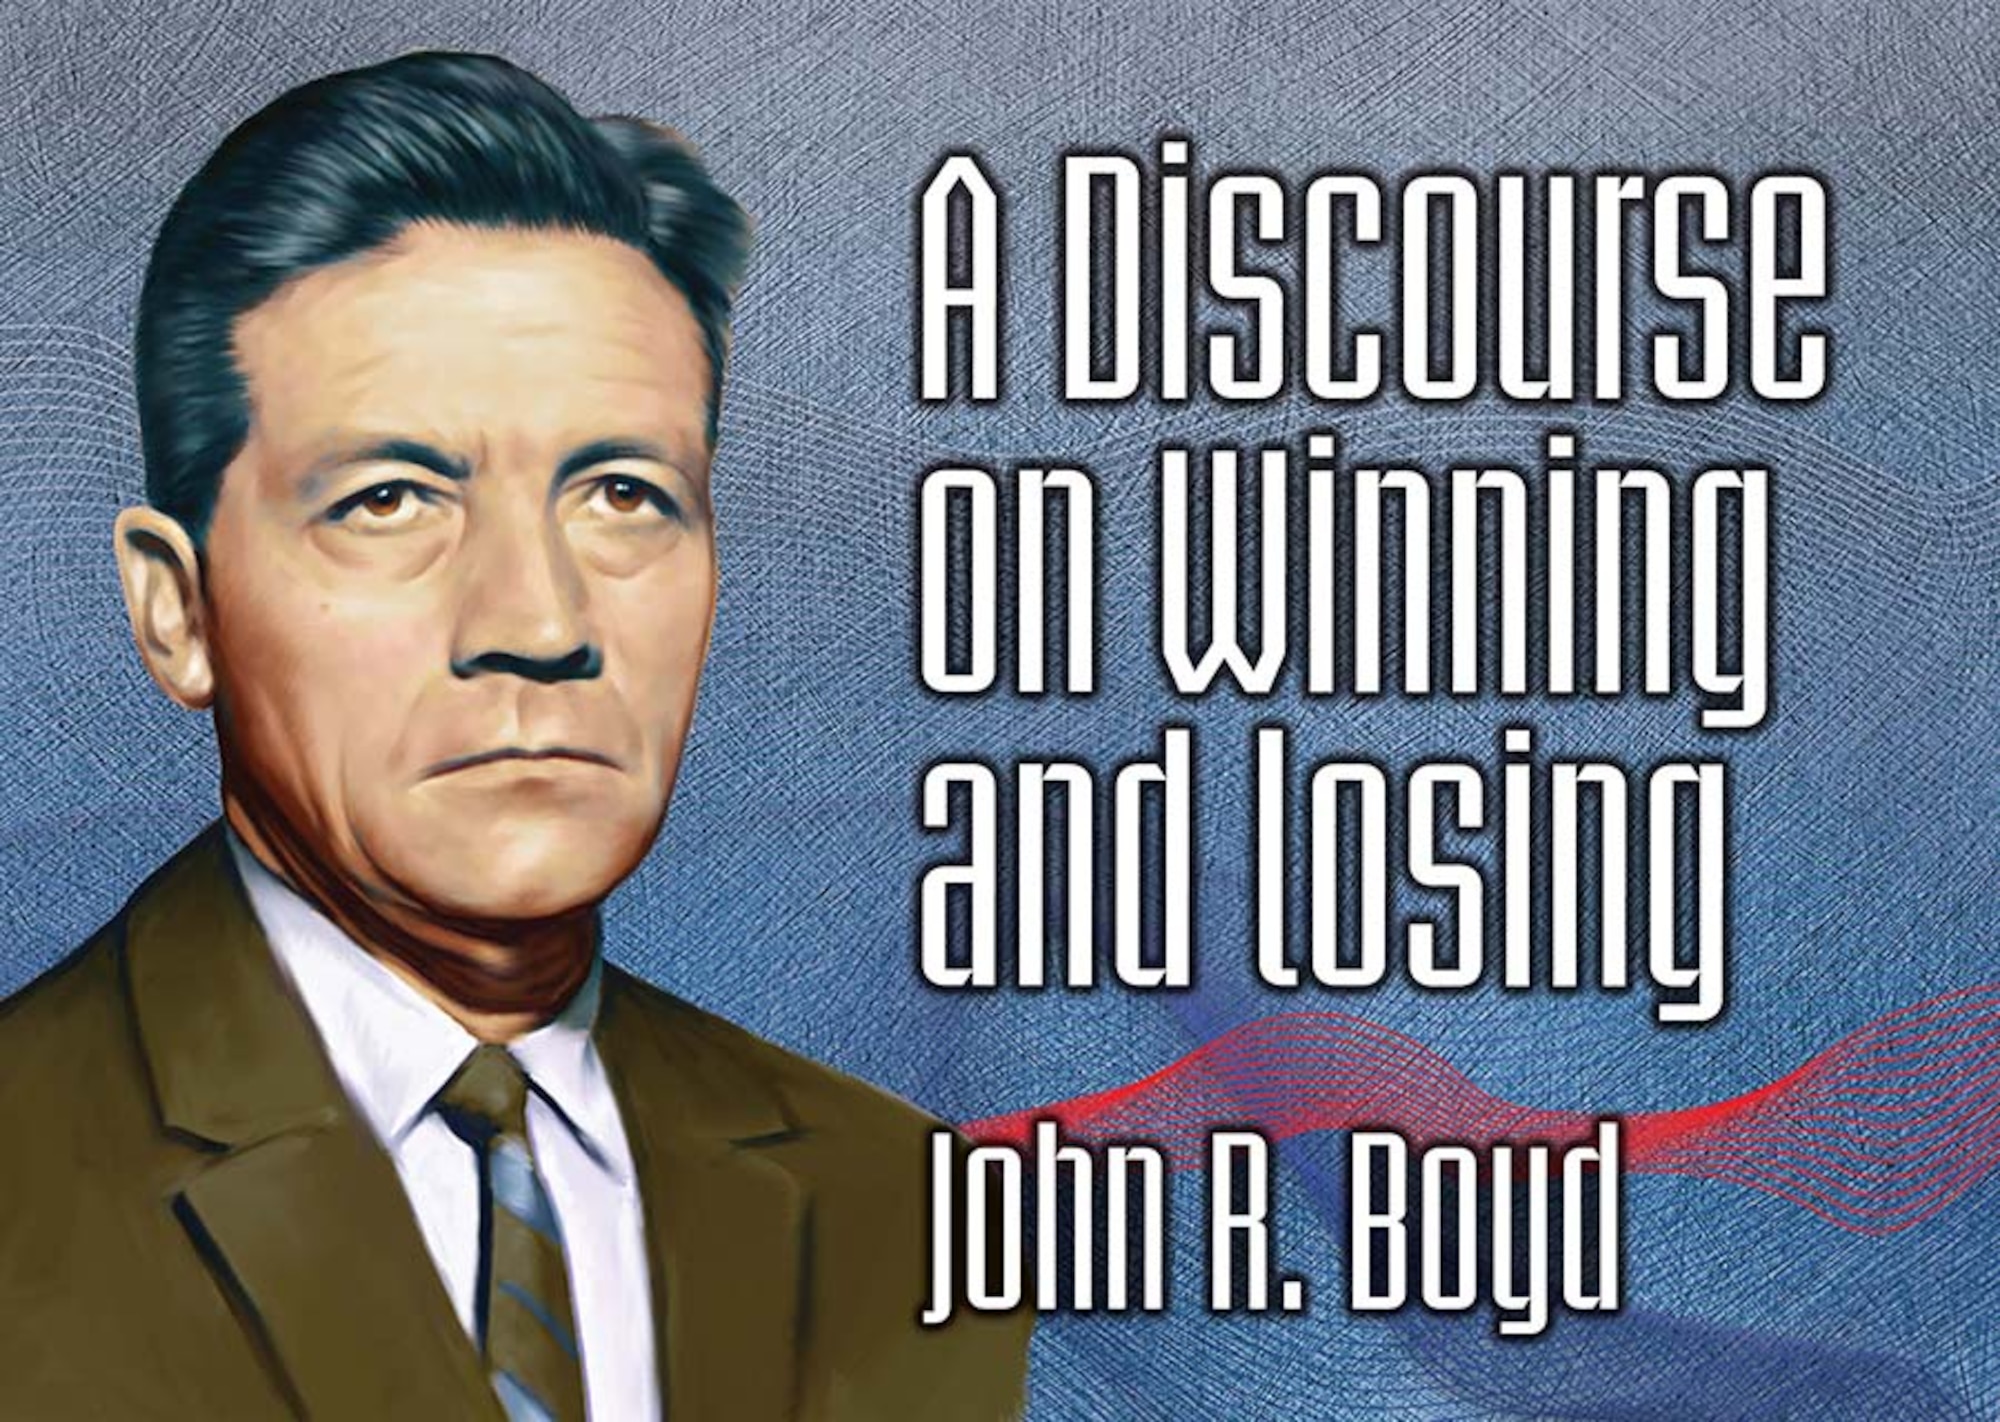 Edited and compiled by Grant T. Hammond, “A Discourse on Winning and Losing” is the first book published on John R. Boyd’s famous same-titled briefing. 
A maverick fighter pilot devoted to the Air Force and its mission, Boyd challenged orthodoxy, including fighter tactics and the theory of how wars were to be fought. Inspiring radically different opinions, he had the courage to state his views—and defend them regardless of consequence. (Courtesy Photo, Air University Press)